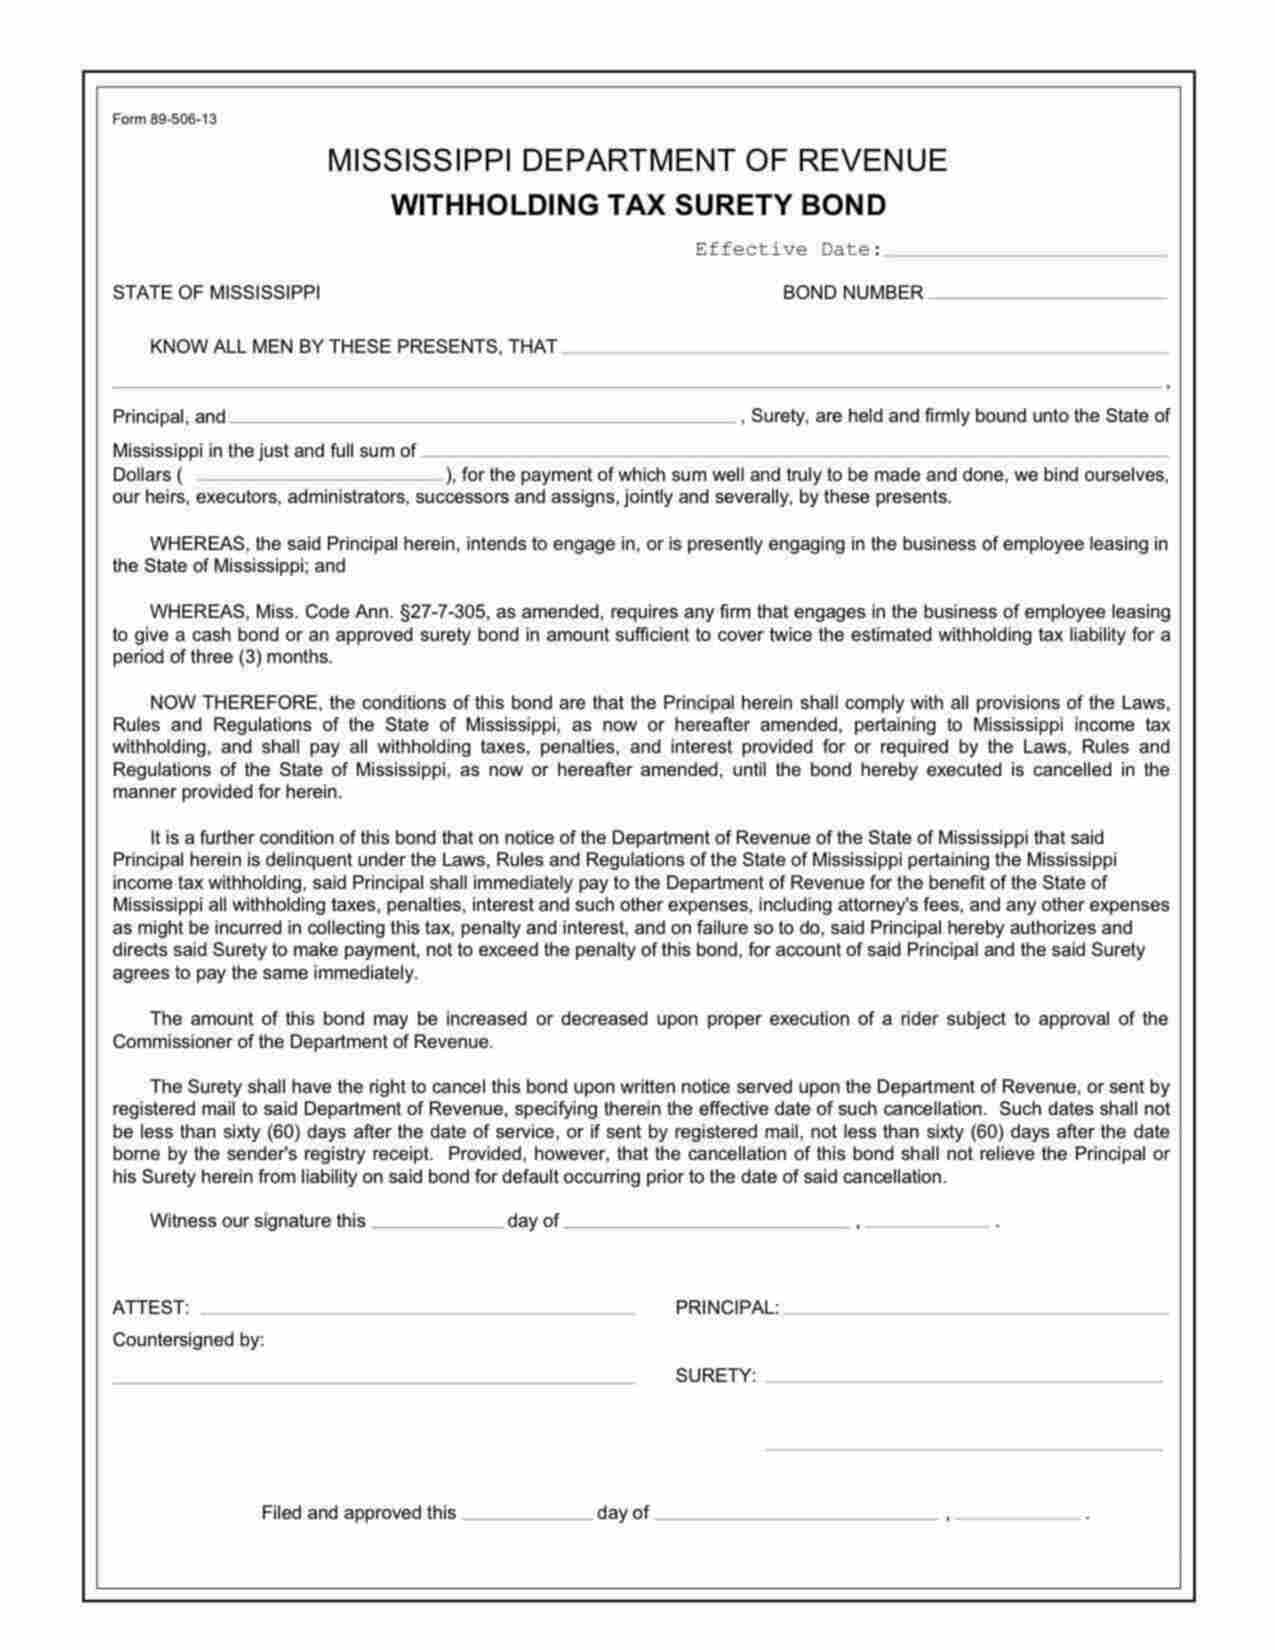 Mississippi Withholding Tax: Employee Leasing Bond Form